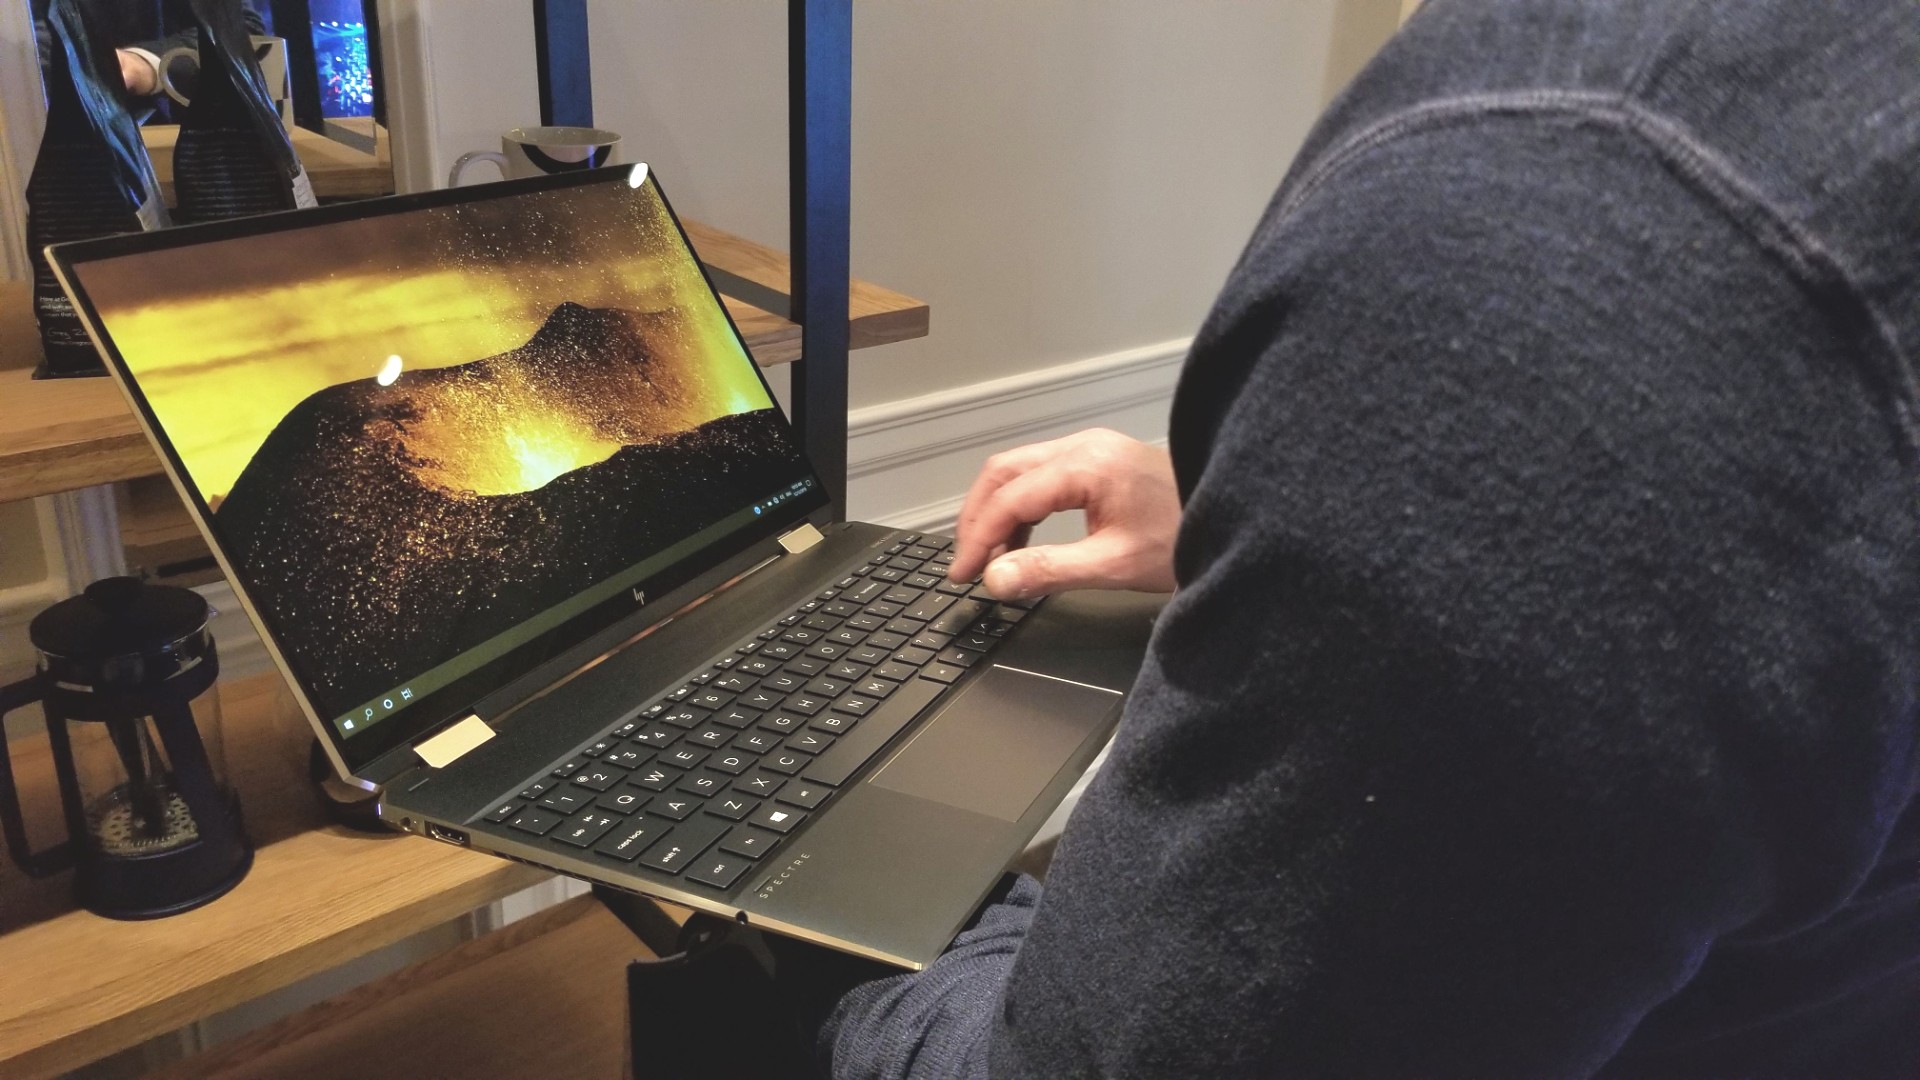 hp spectre x 360 15 features price photos release date x360 2020 07